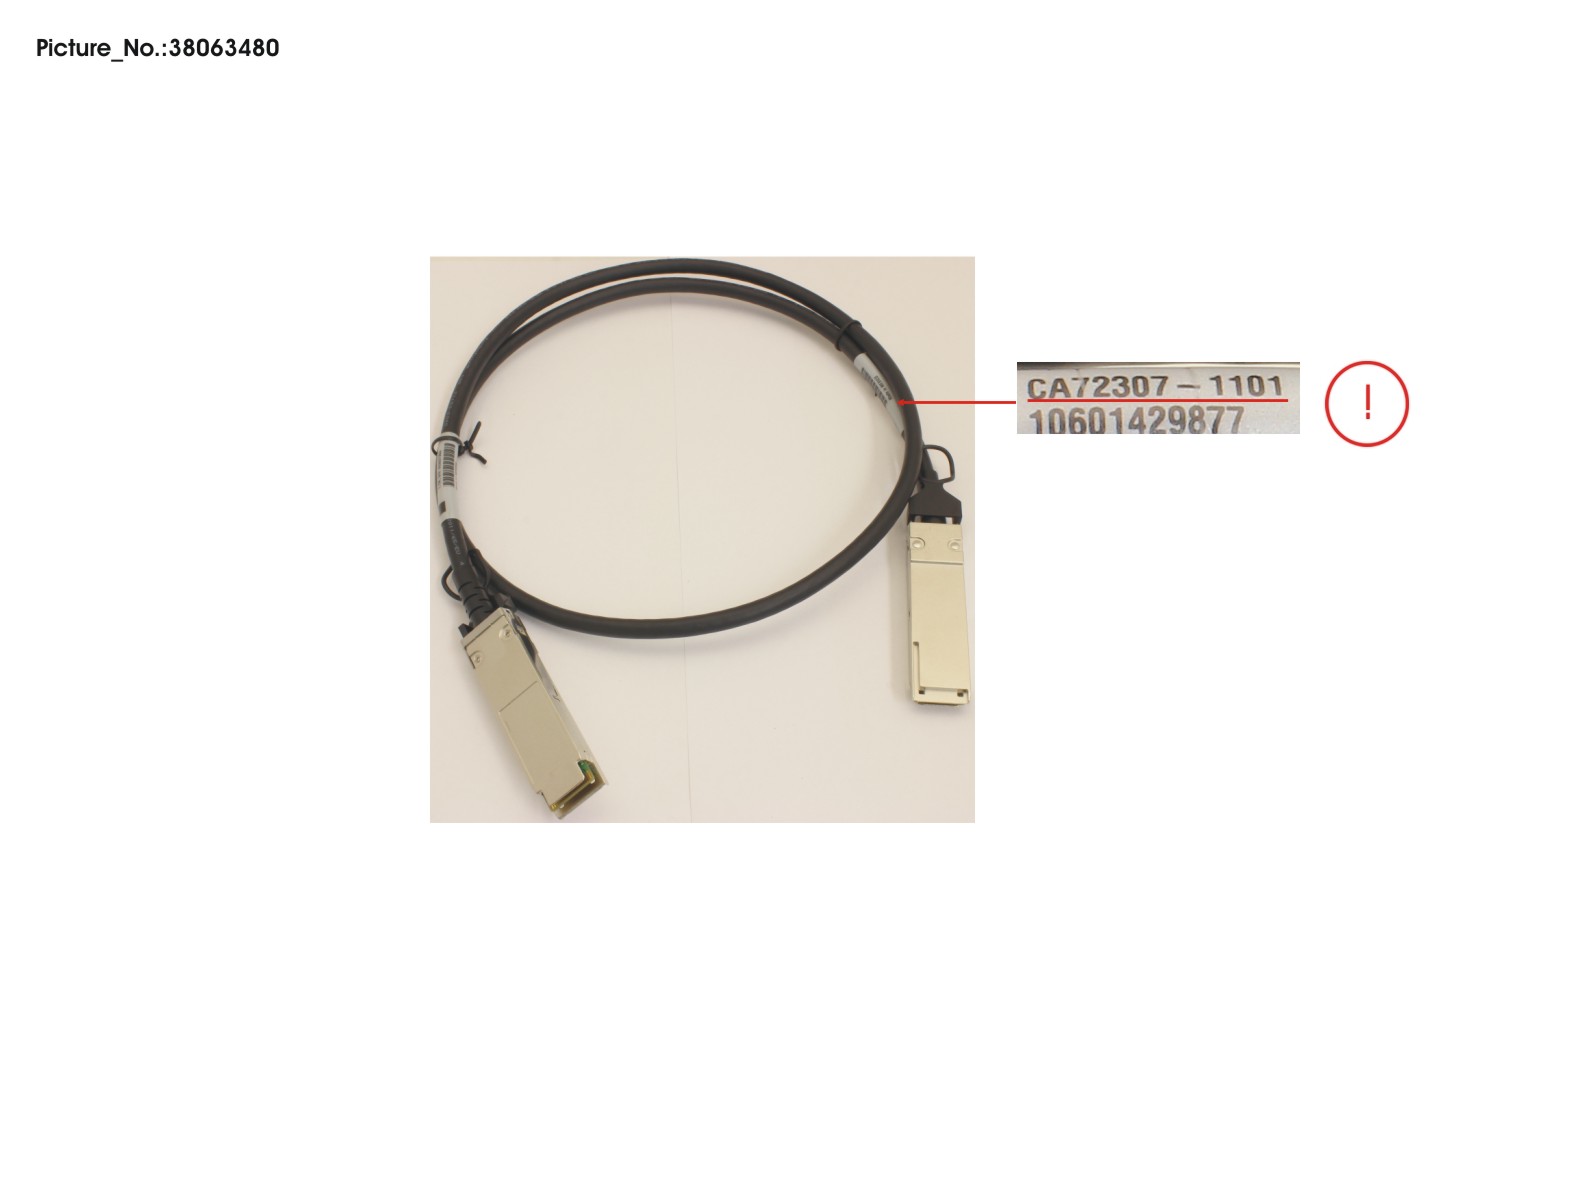 DX HE SPARE QSFP+ CU CABLE 1,1M